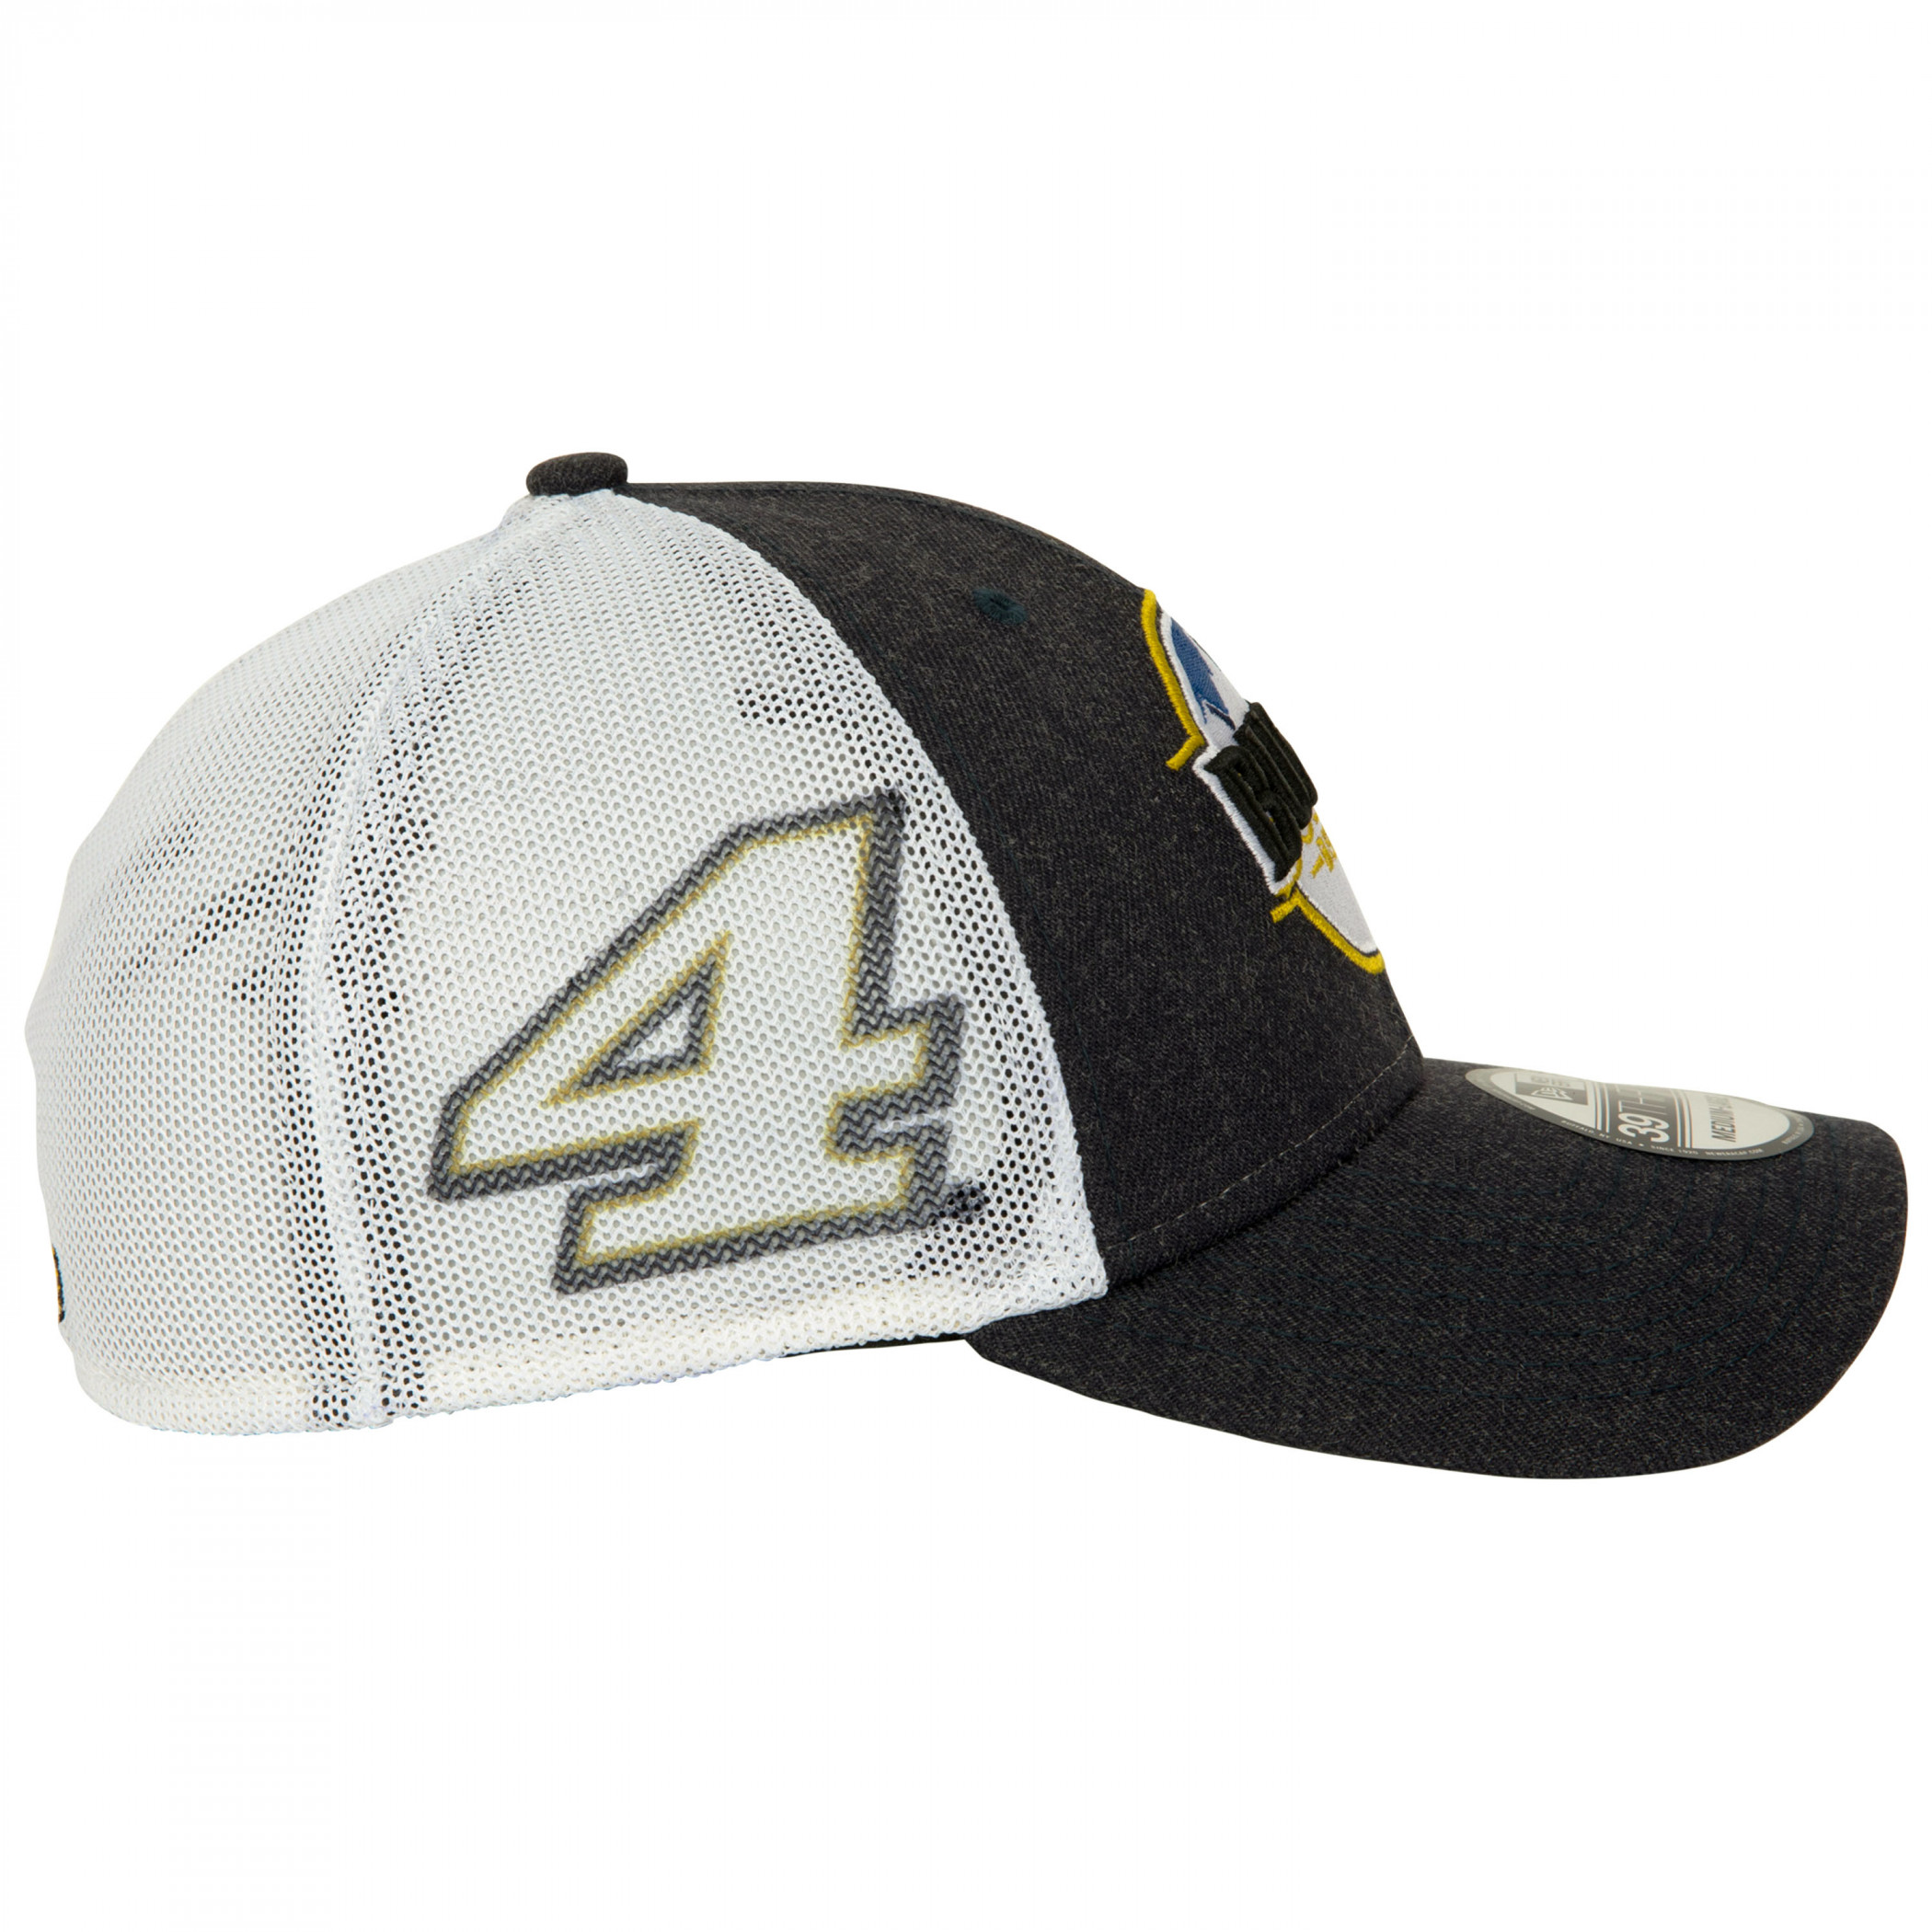 Busch Beer Kevin Harvick #4 NASCAR New Era 39Thirty Fitted Trucker Hat